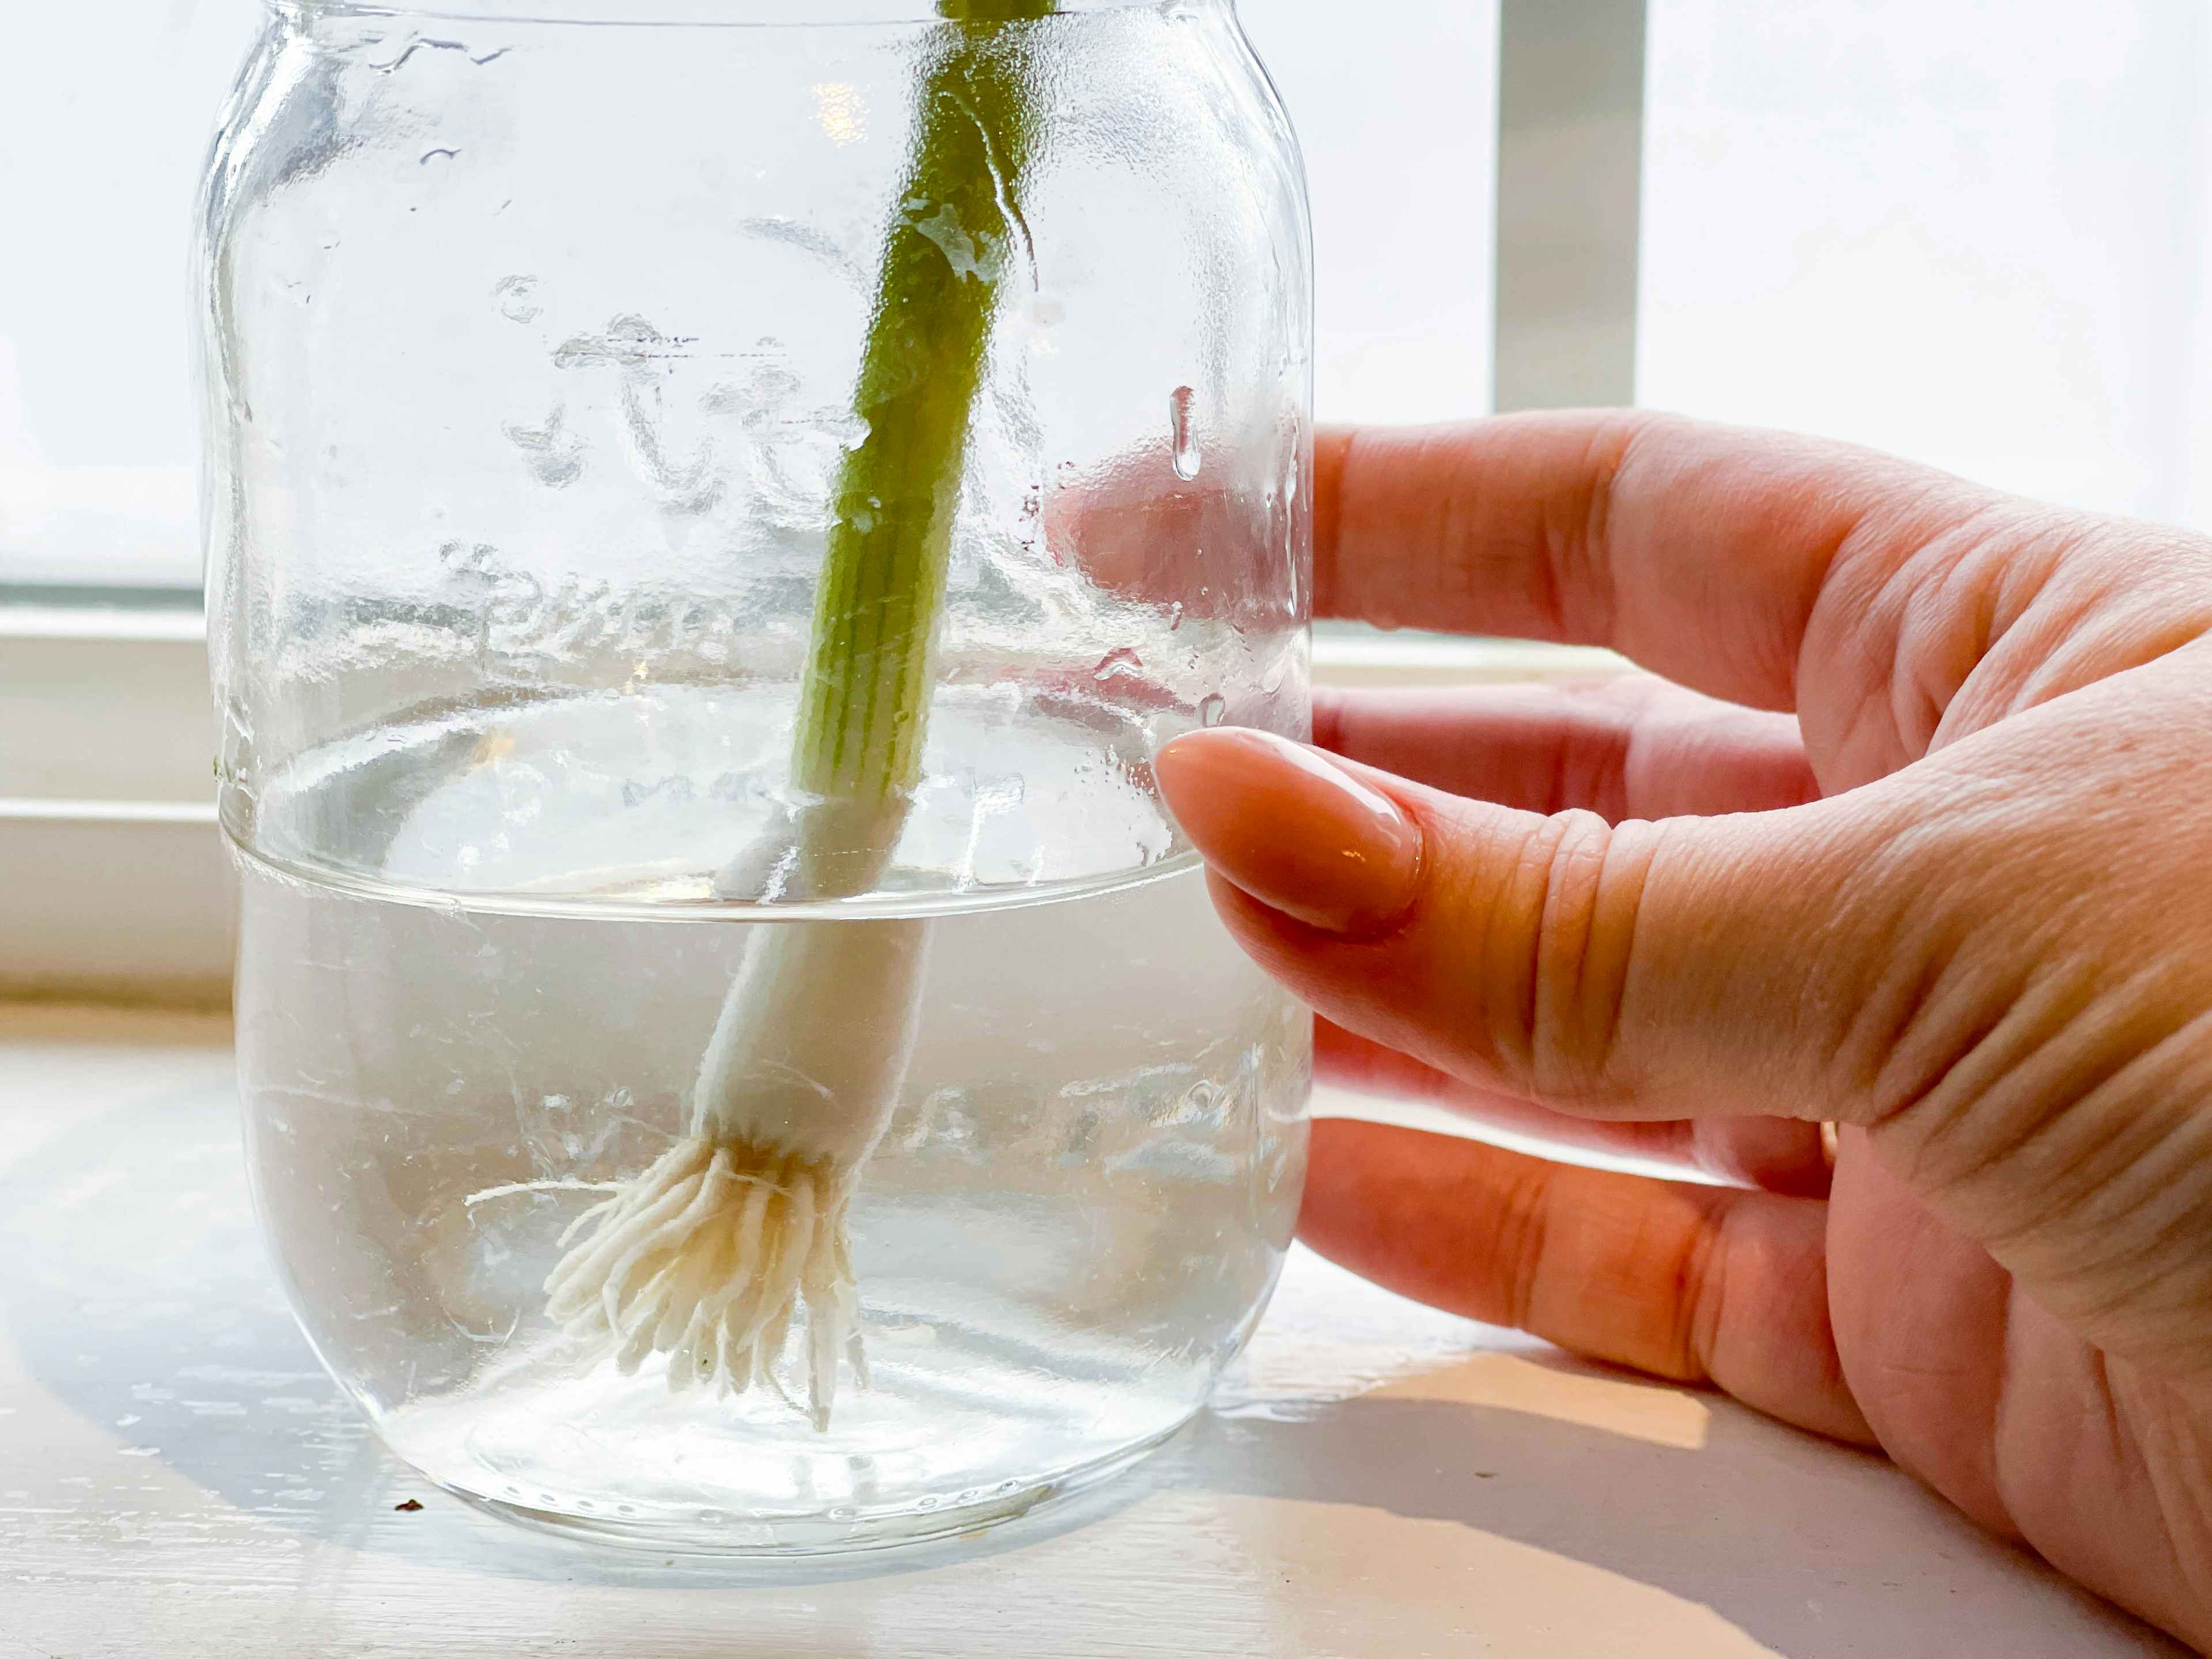 A person's hand holding a mason jar that is filled with some water and a green onion that is starting to regrow.